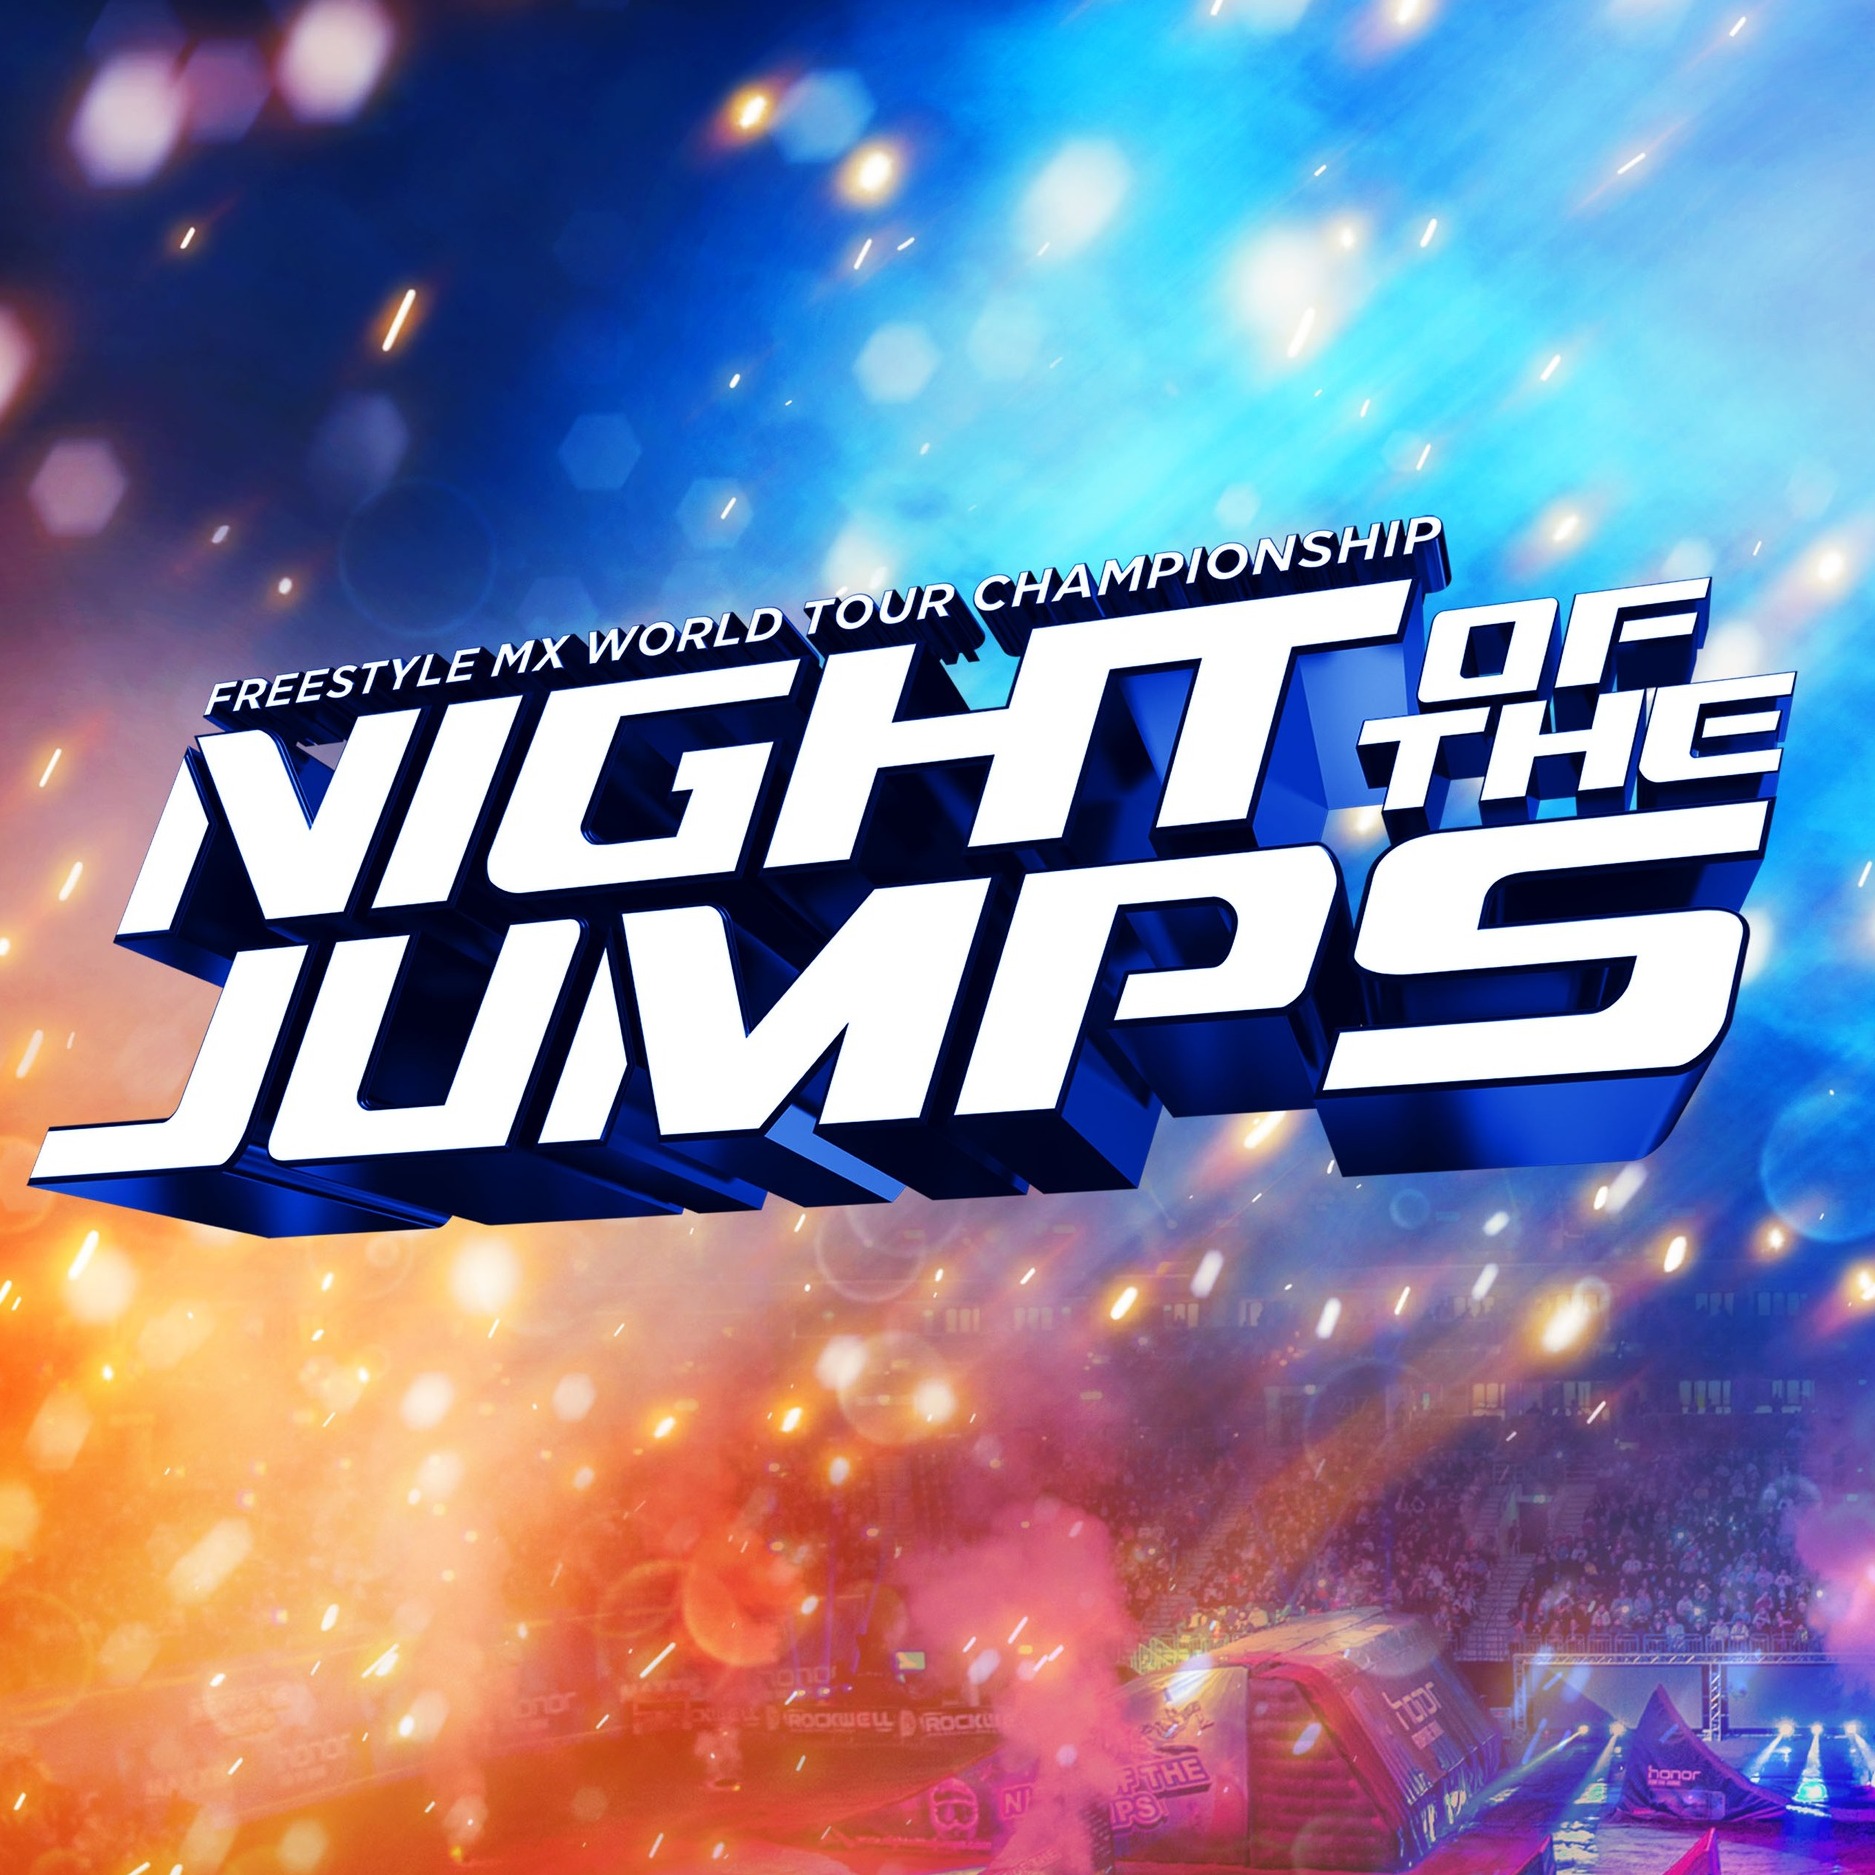 Night of the Jumps en OVB Arena Tickets